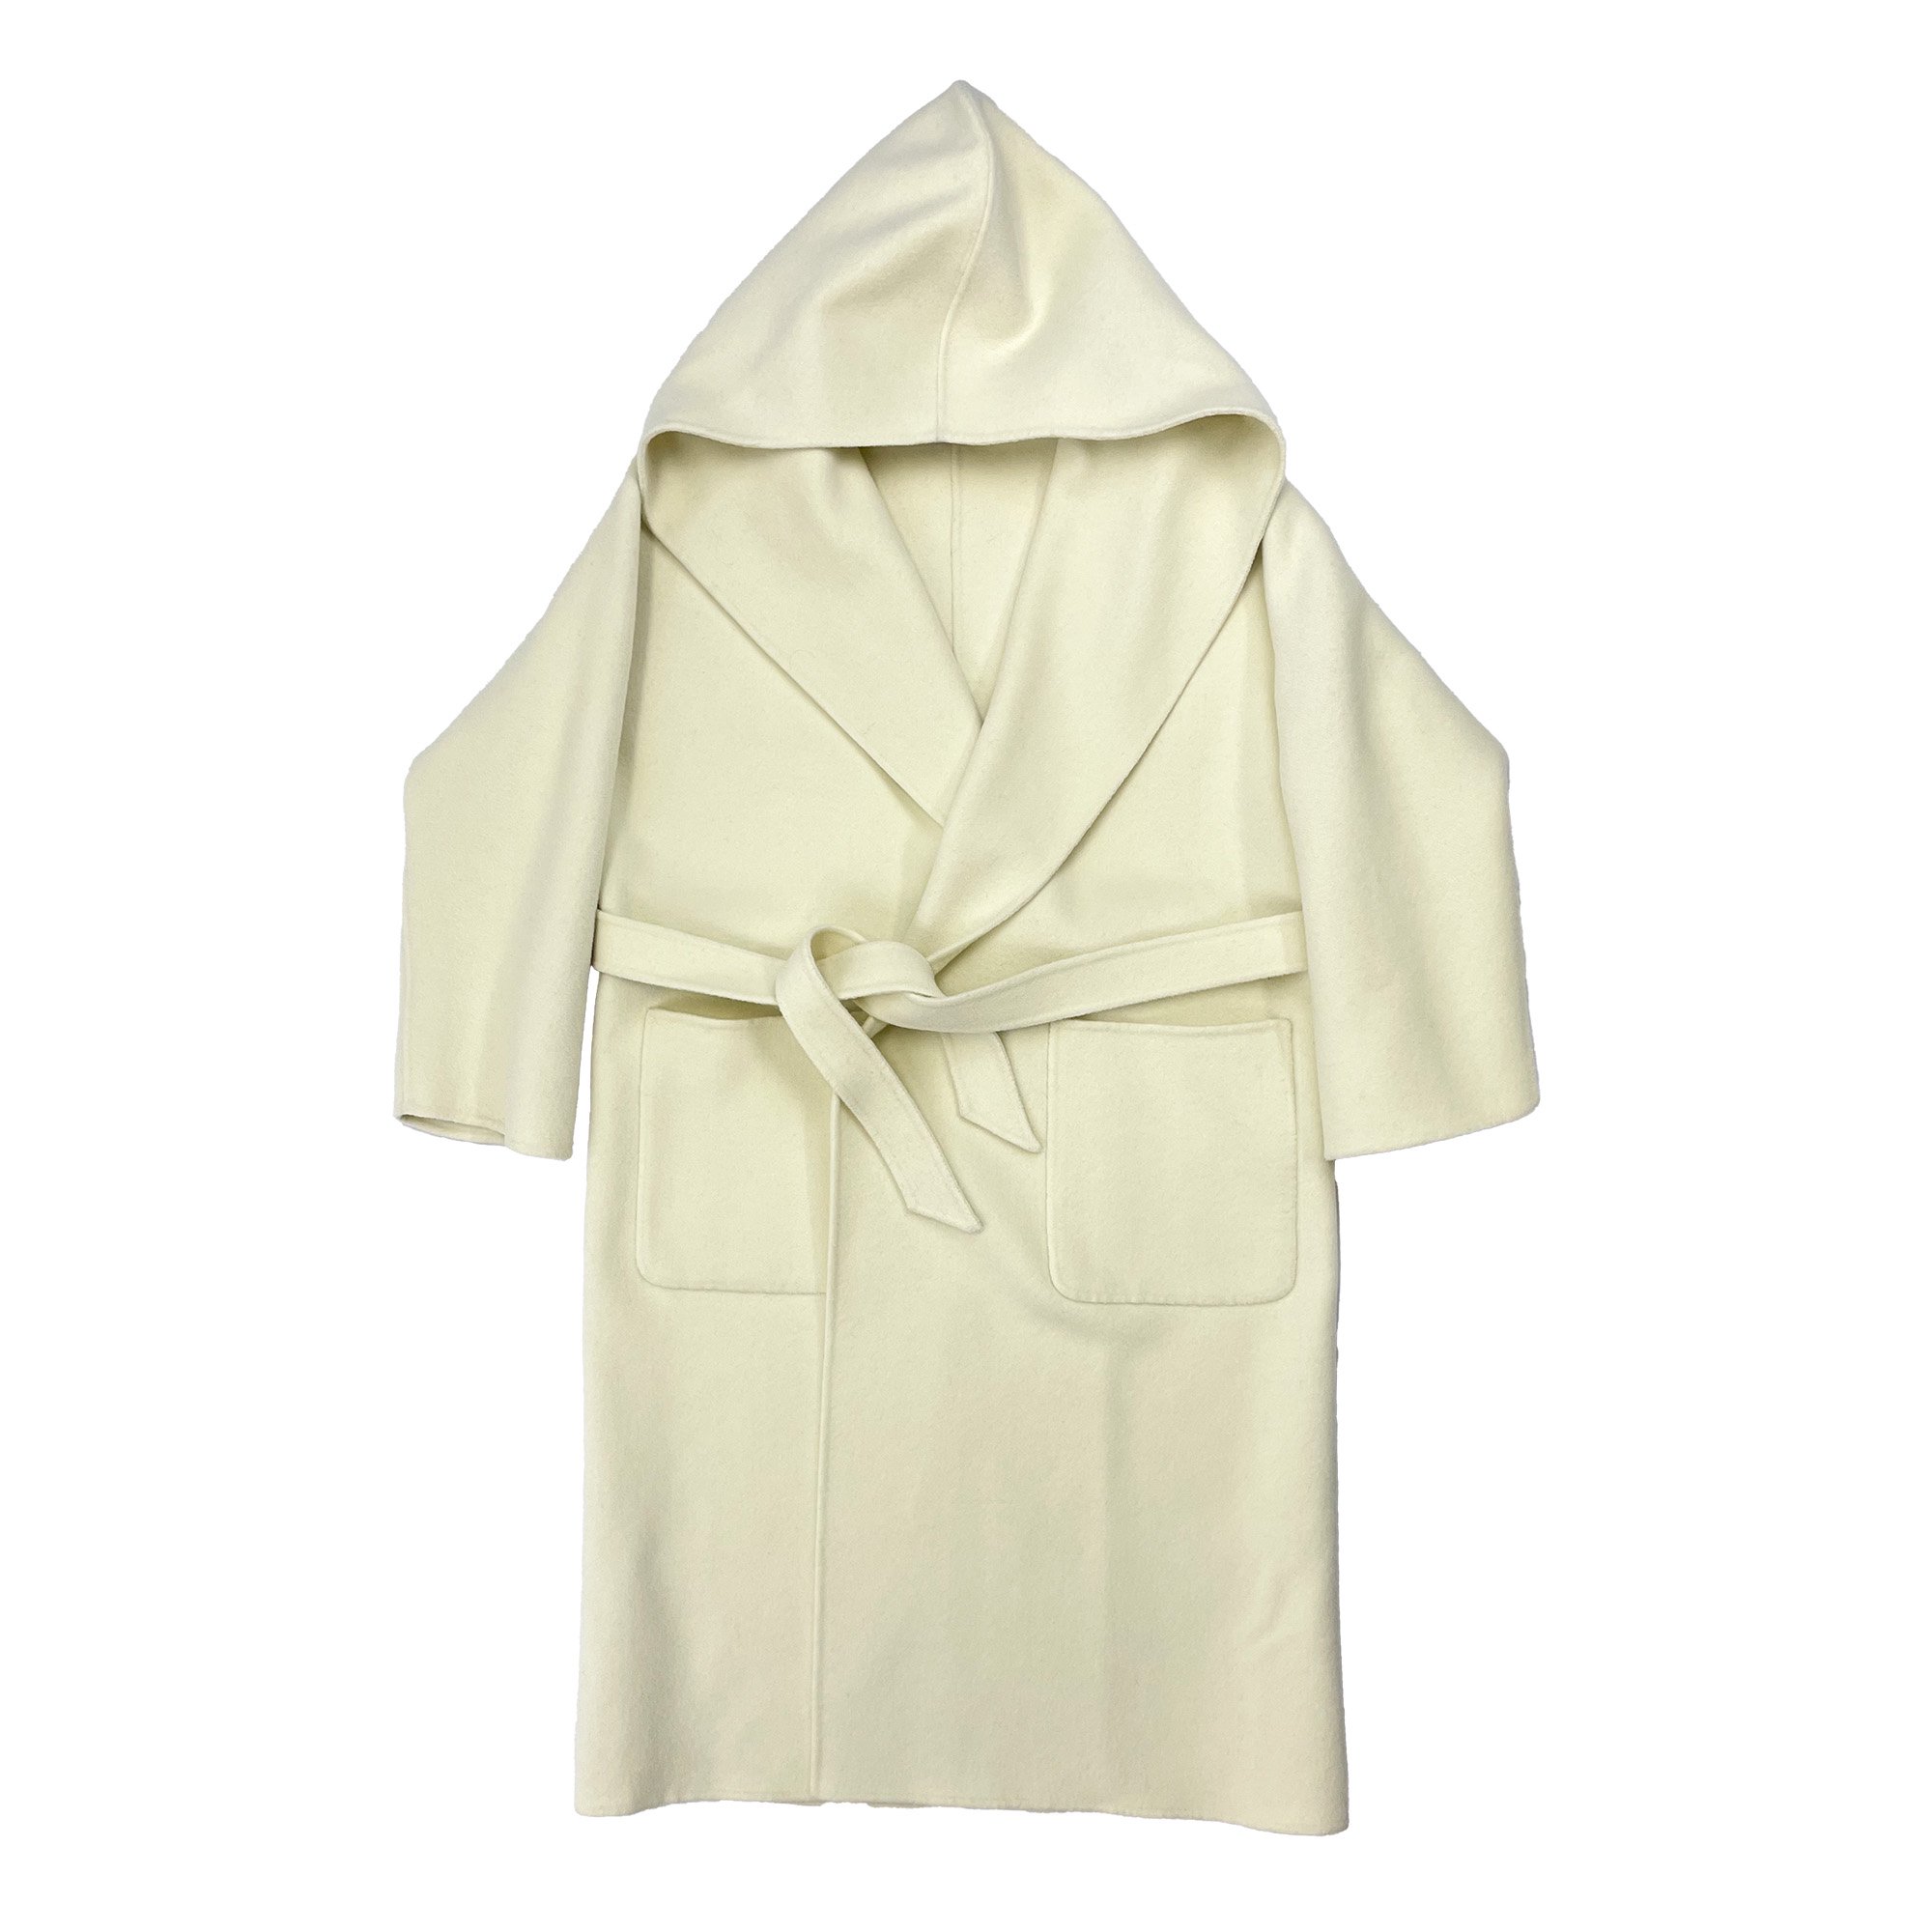 <img class='new_mark_img1' src='https://img.shop-pro.jp/img/new/icons47.gif' style='border:none;display:inline;margin:0px;padding:0px;width:auto;' />LIVIANA CONTI HOOD RAP COAT【30%OFF】